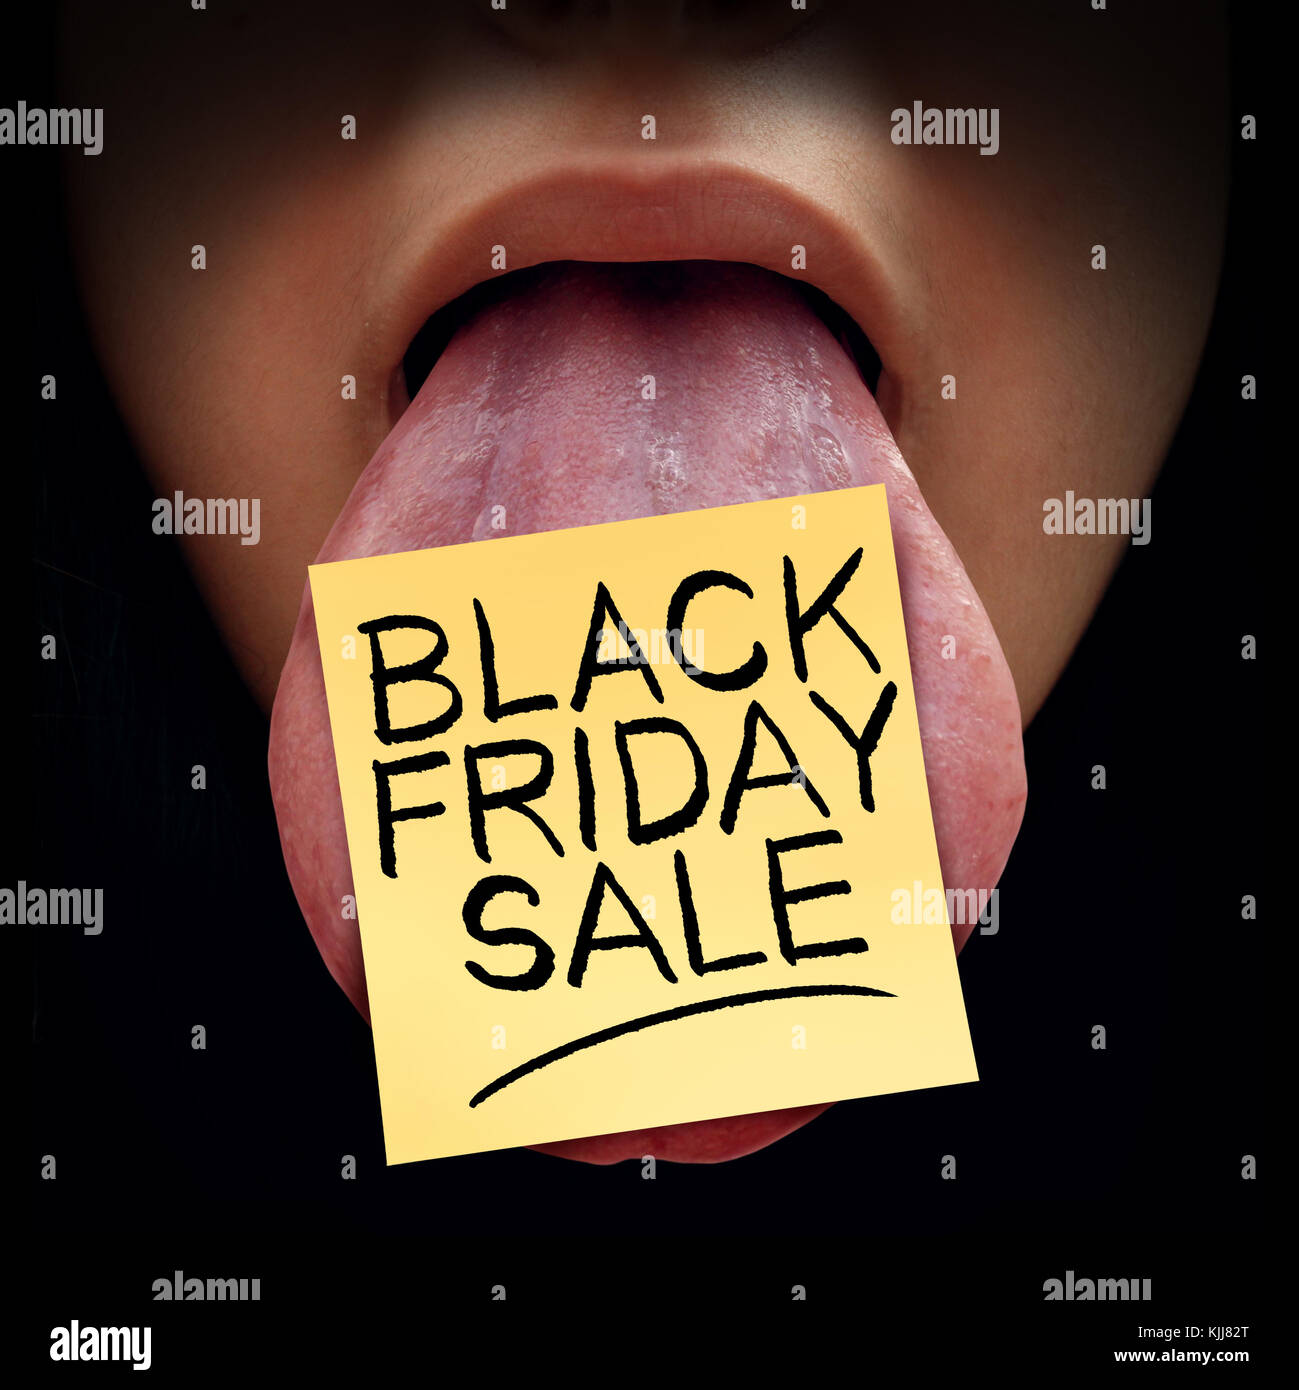 Black friday sale promotional marketing and advertising message as a person with a note on a tongue as a holiday sales concept. Stock Photo